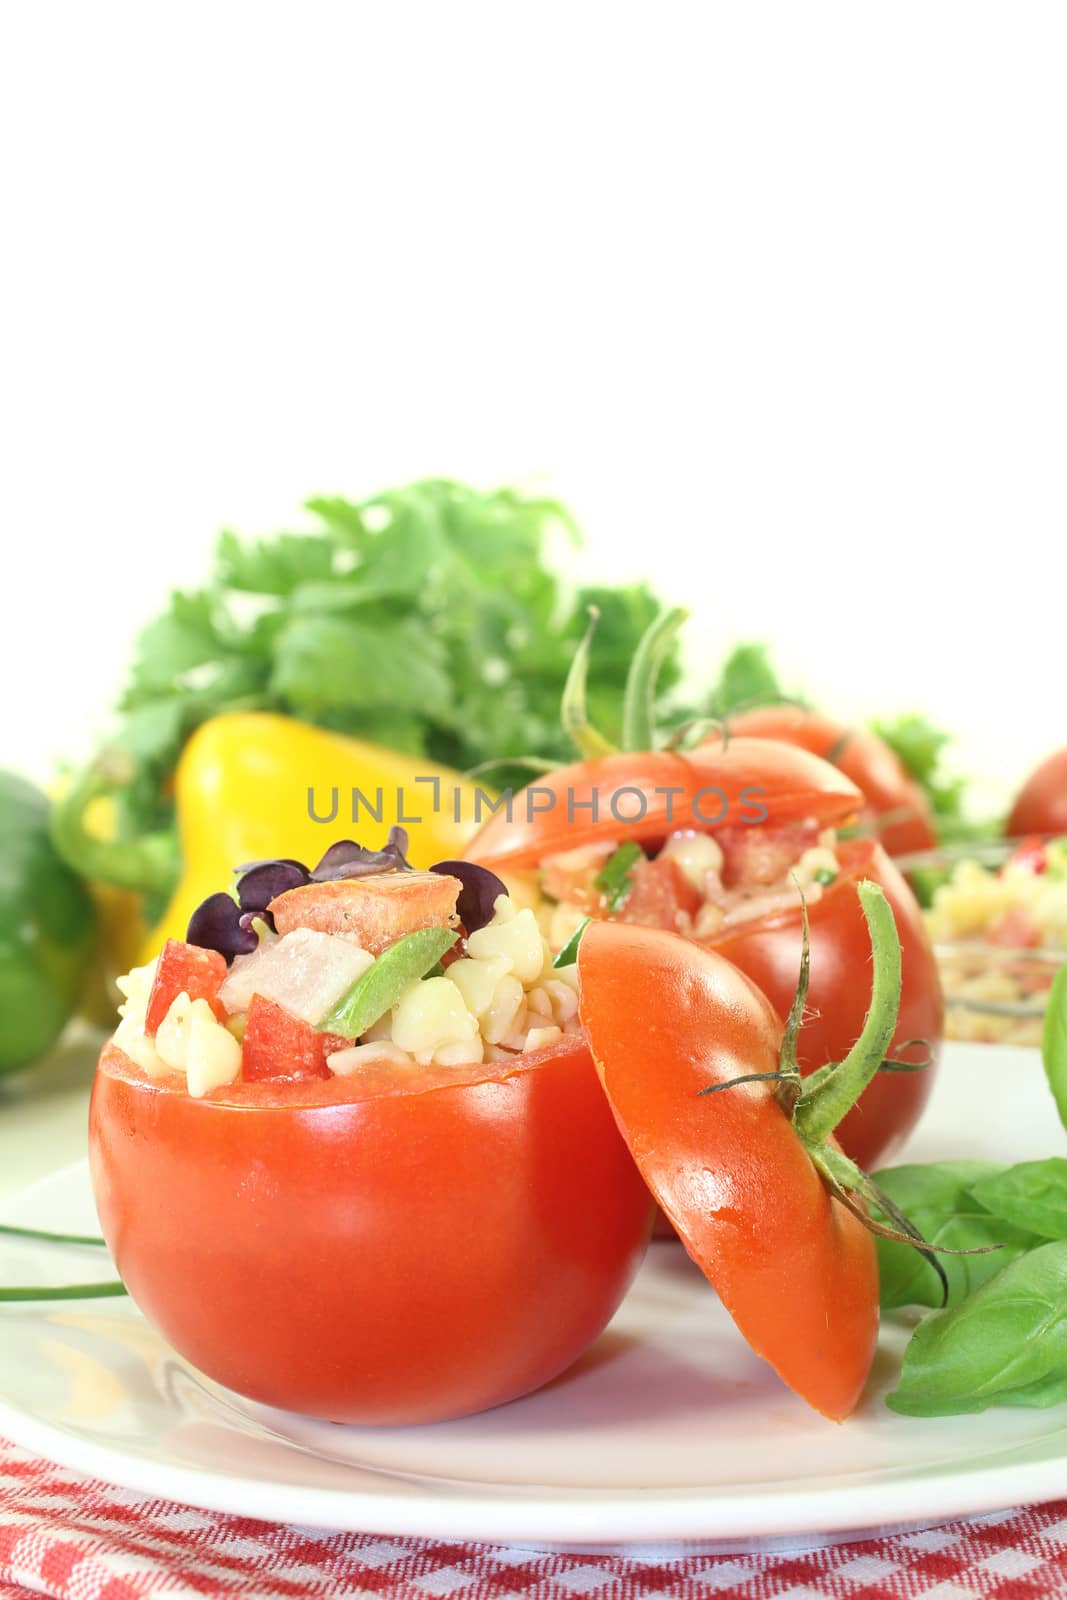 stuffed pasta salad with tomatoes and basil on a light background